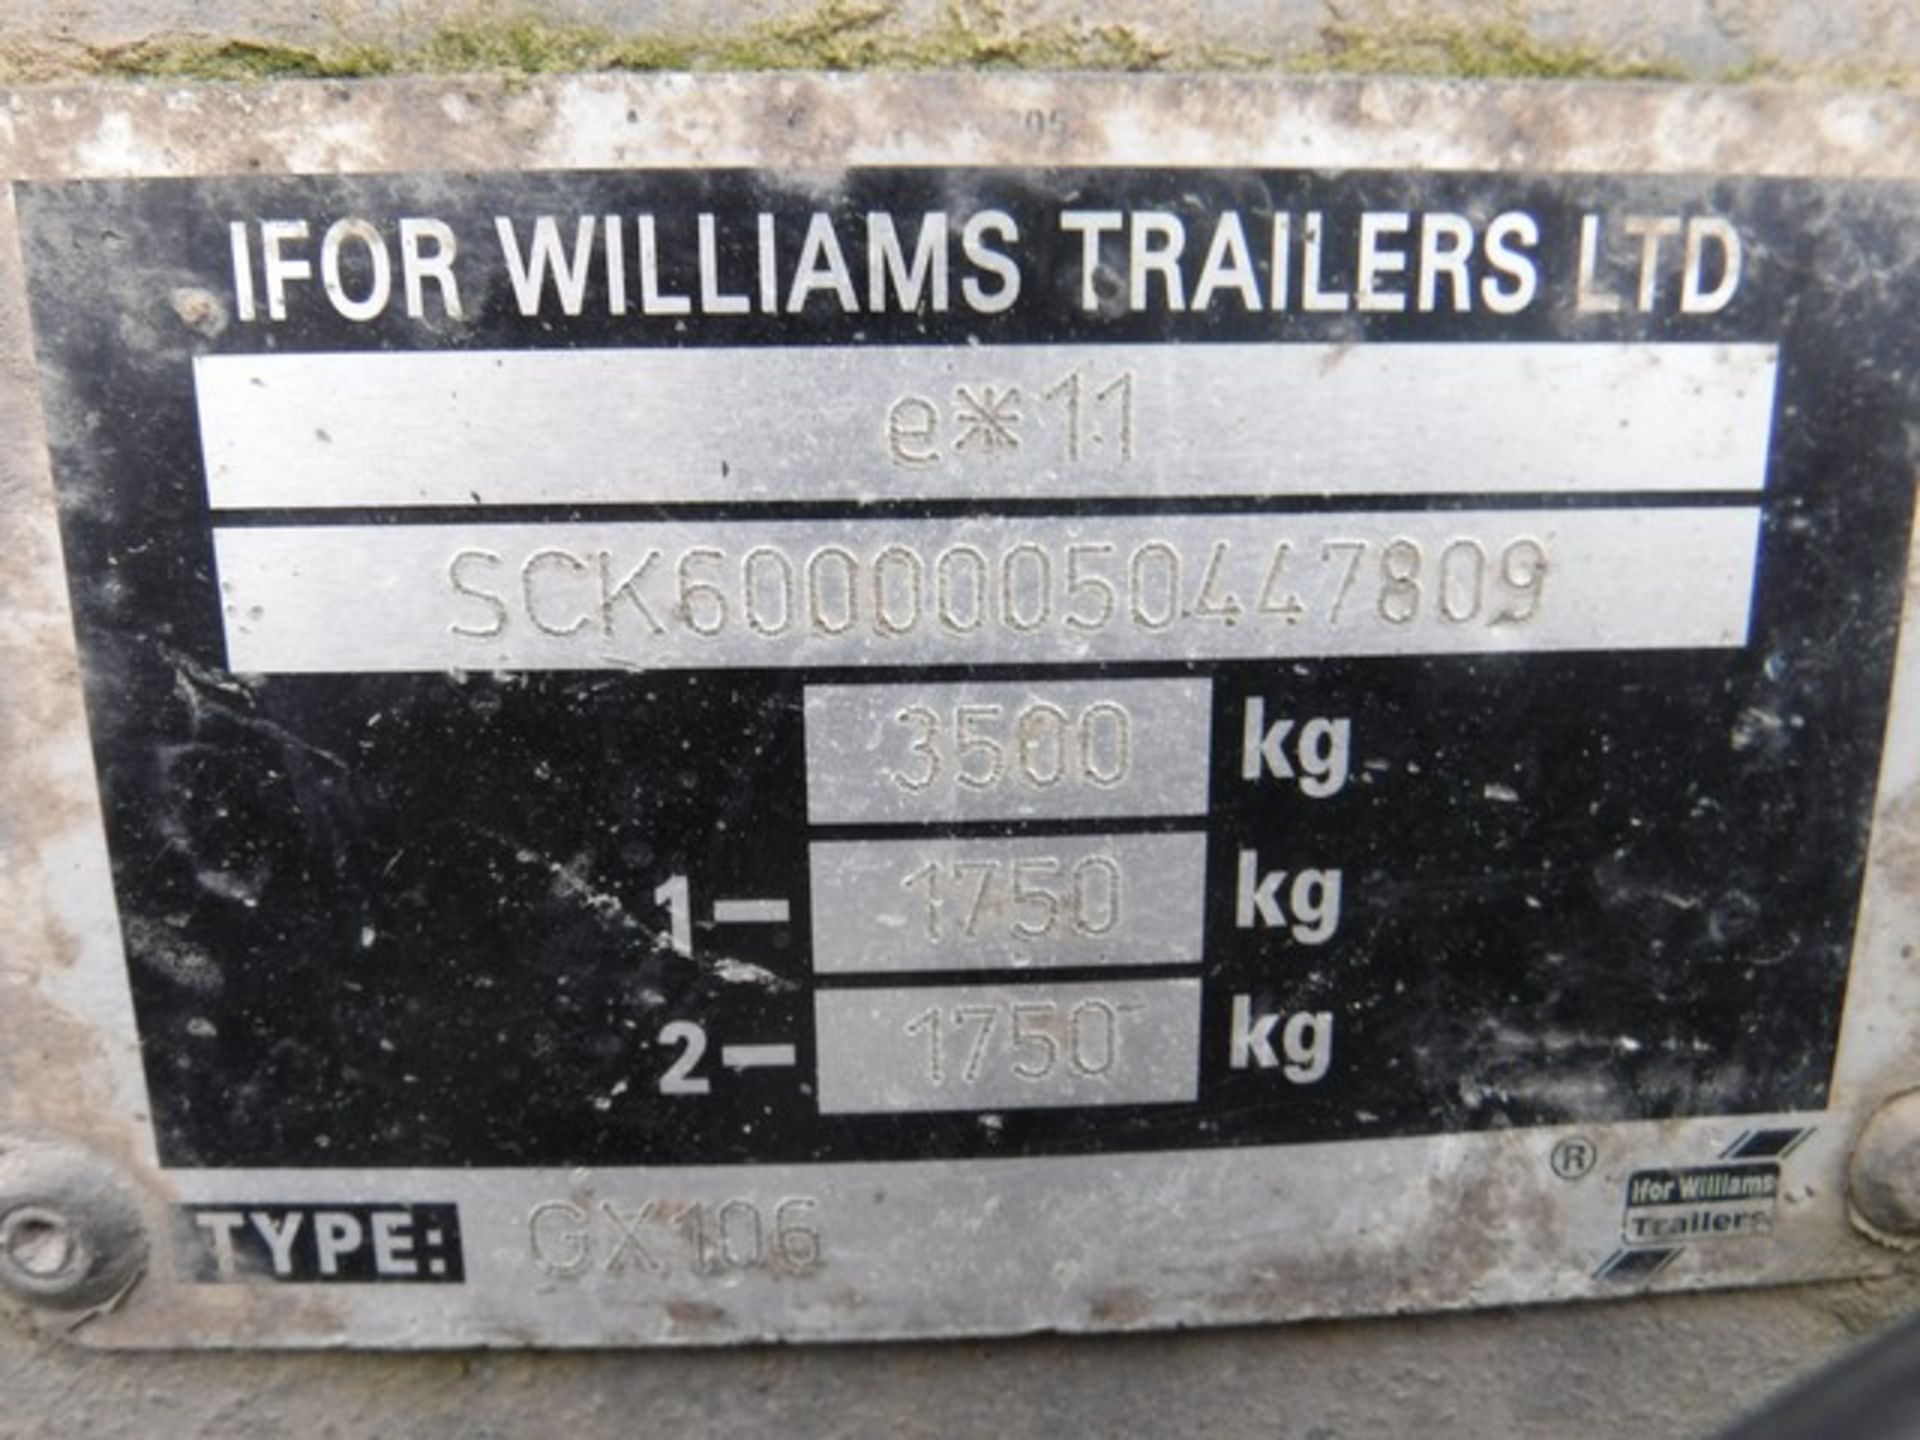 IFOR WILLIAMS 3.5T PLANT TRAILER S/N SCK60000050447809 - Image 4 of 4